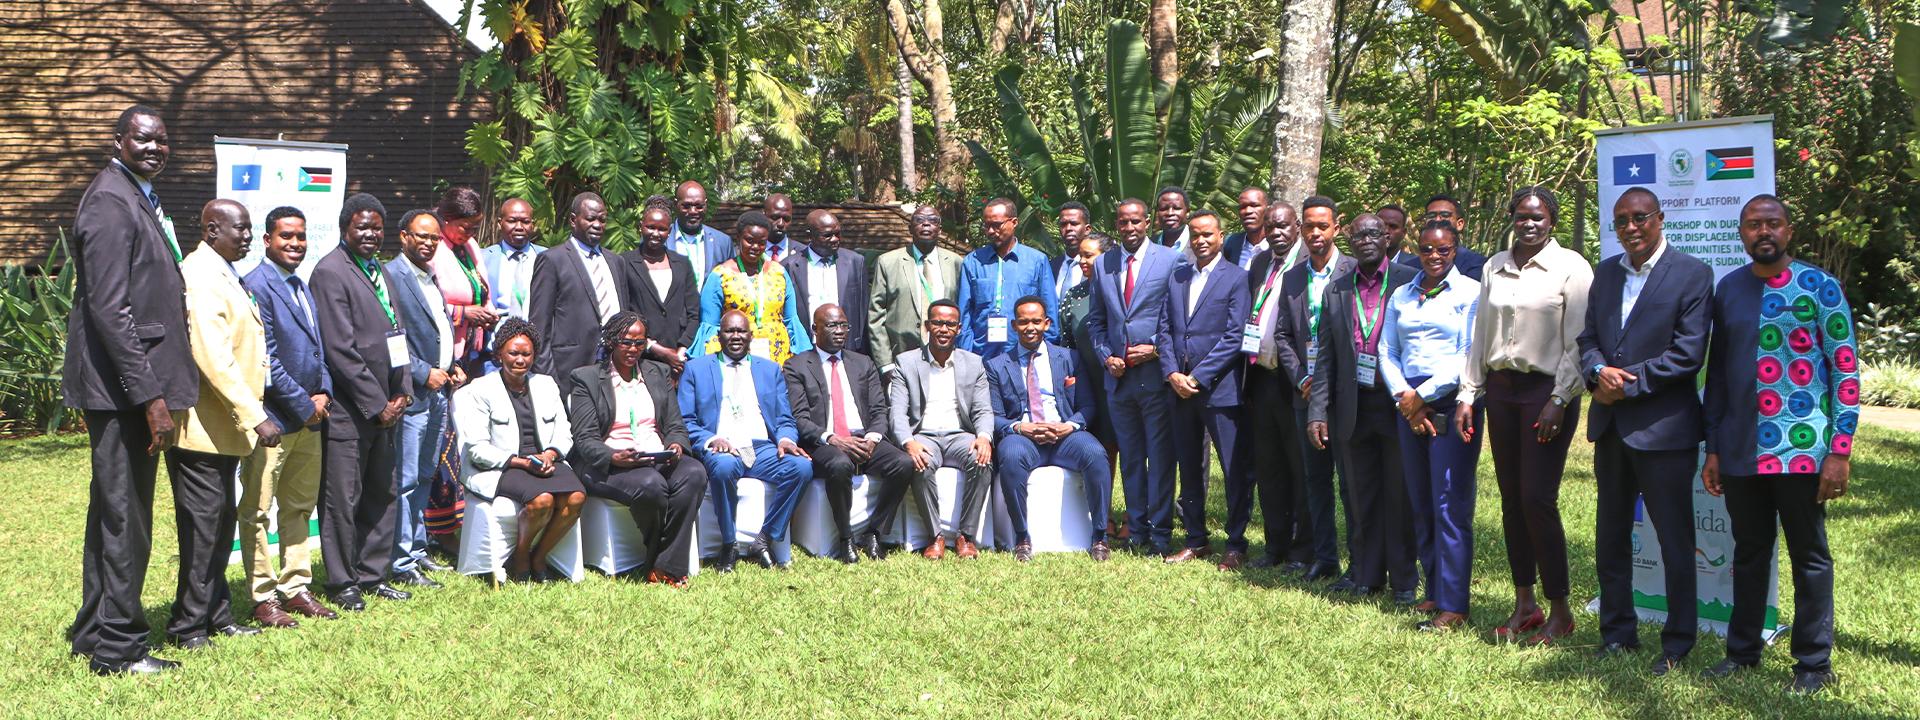 Somalia and South Sudan Share Experiences on Durable Solutions under the IGAD Support Platform